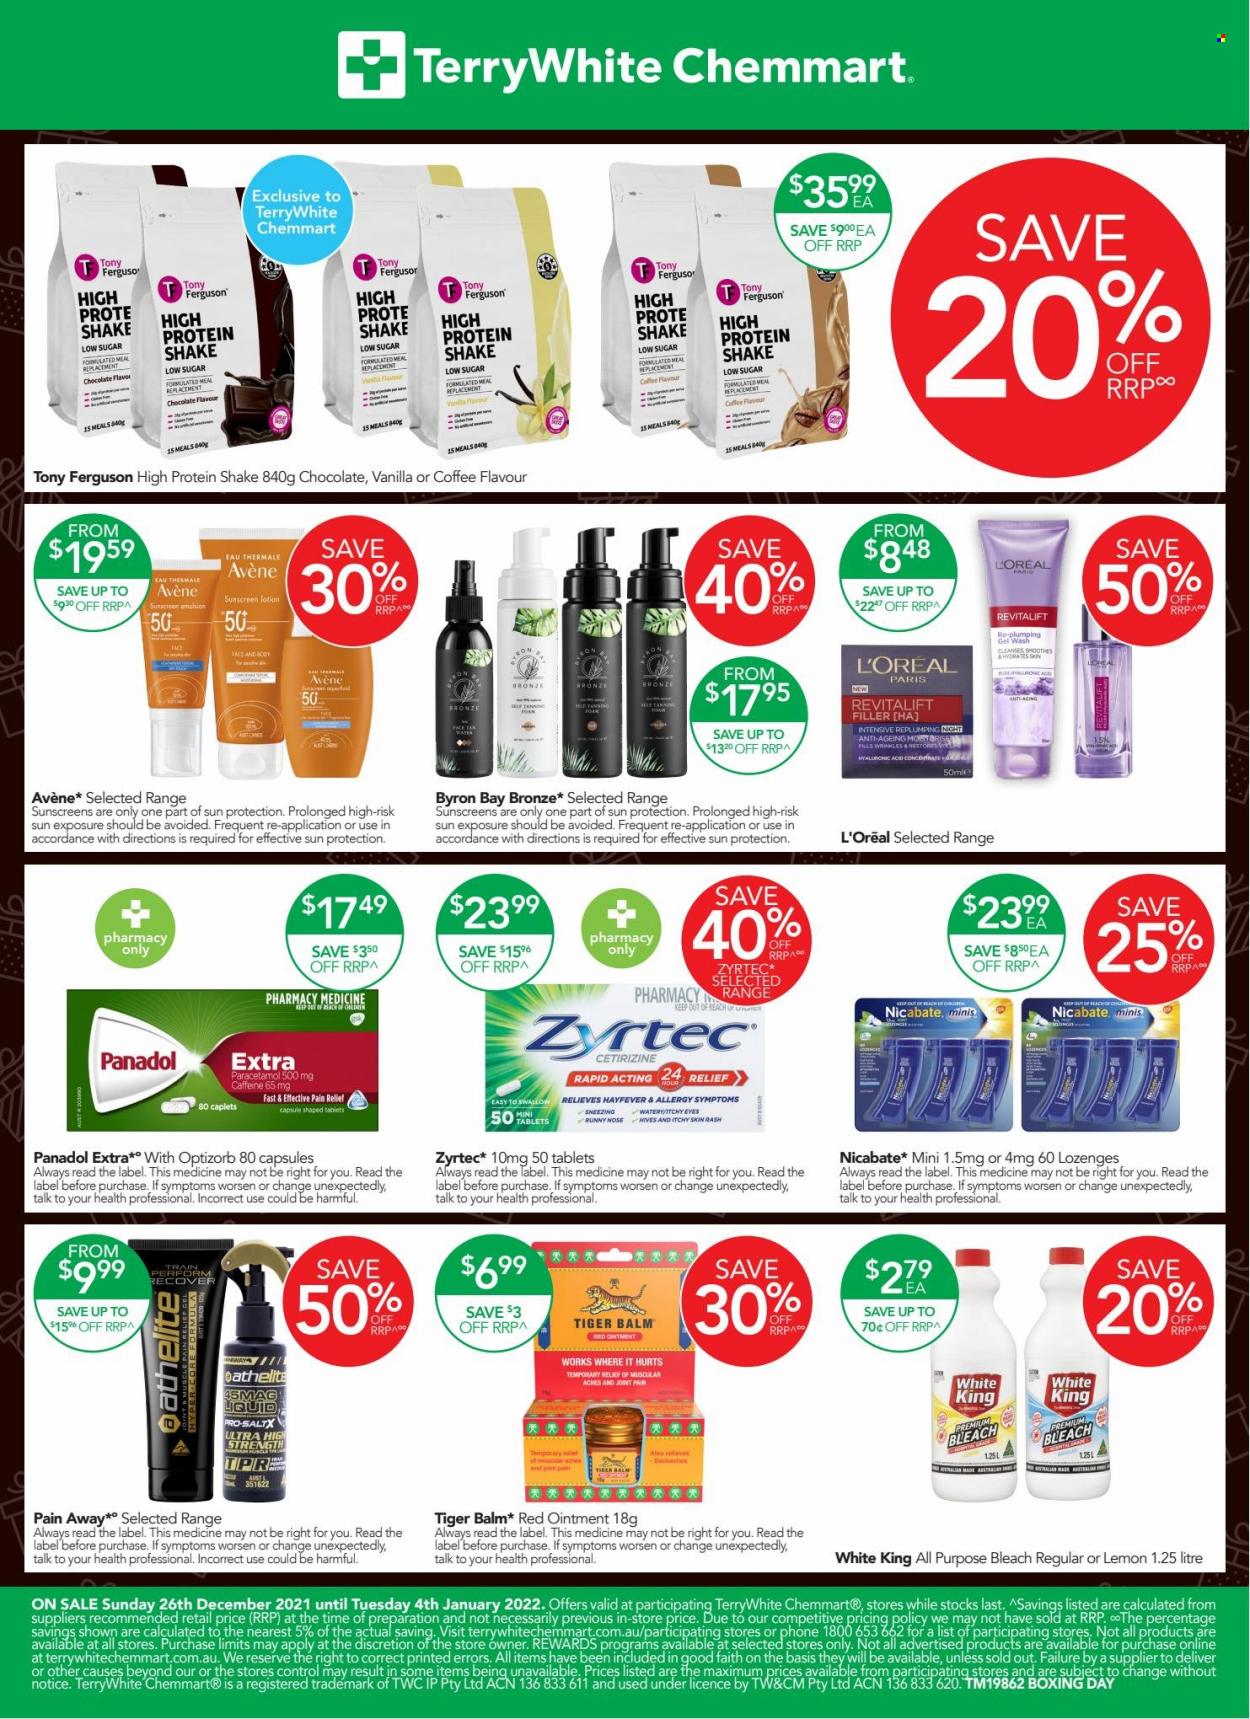 TerryWhite Chemmart catalogue  - 26.12.2021 - 4.1.2022. Page 2.